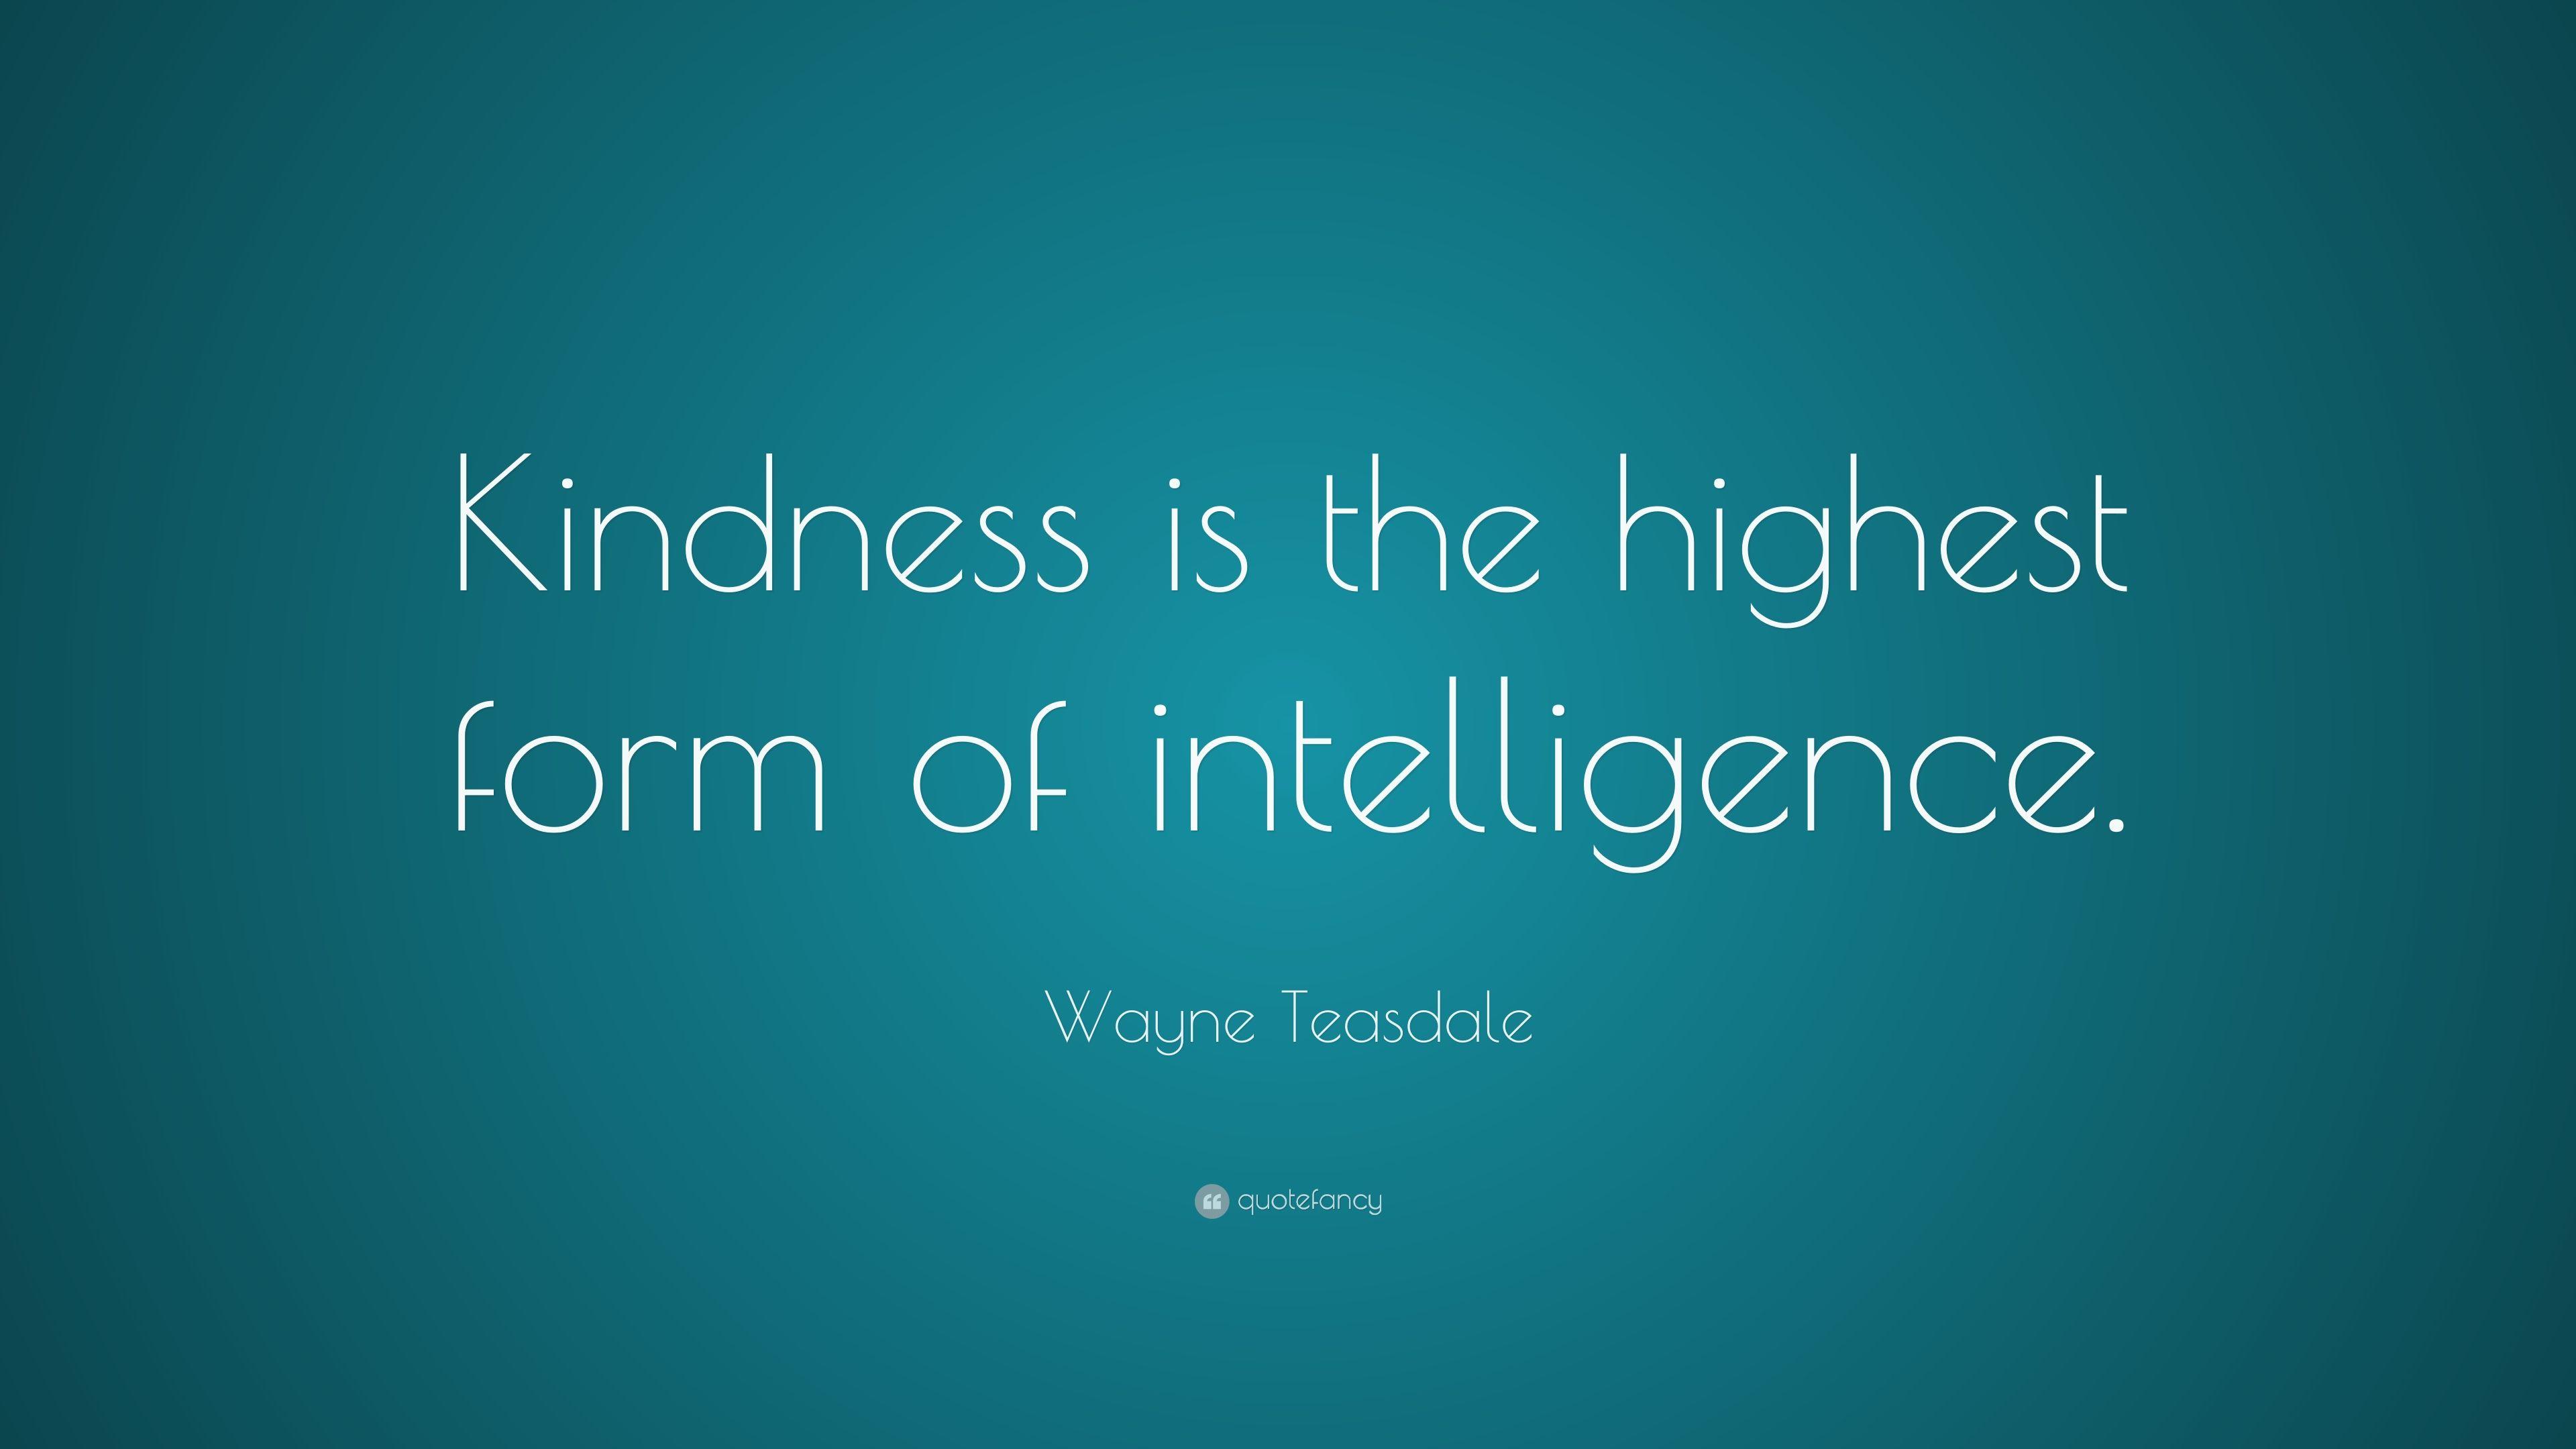 Wayne Teasdale Quote: “Kindness is the highest form